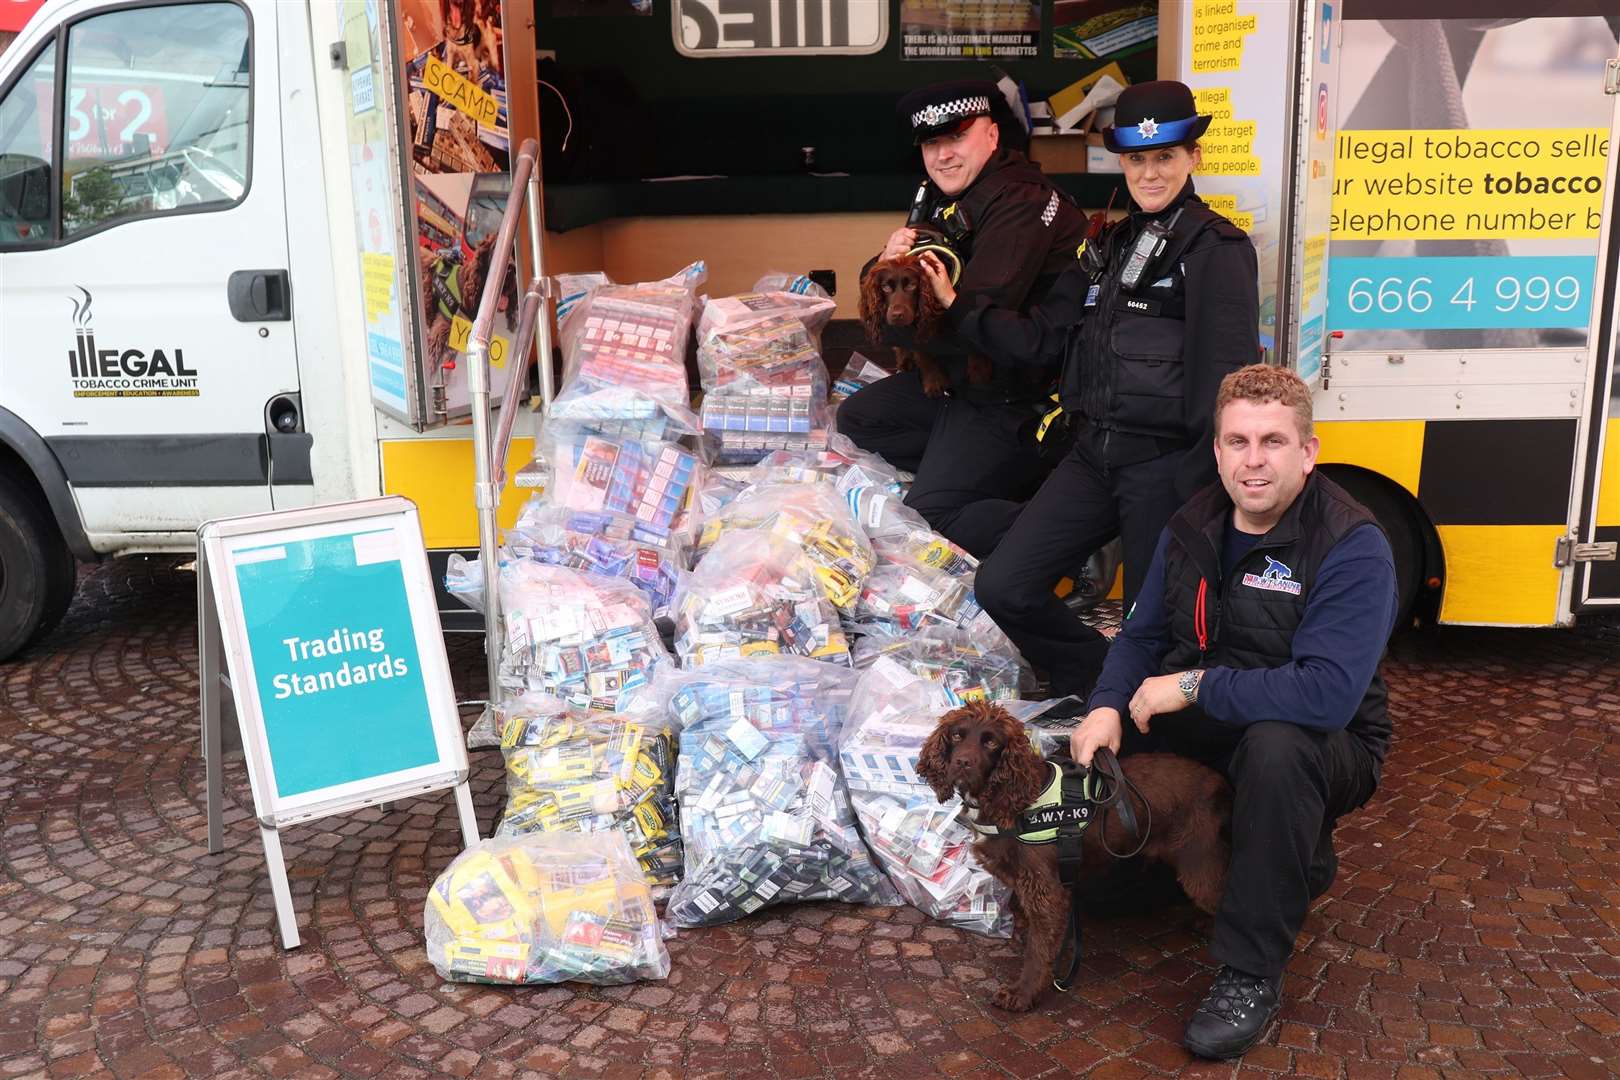 Officers with the illegal cigarettes and tobacco finds